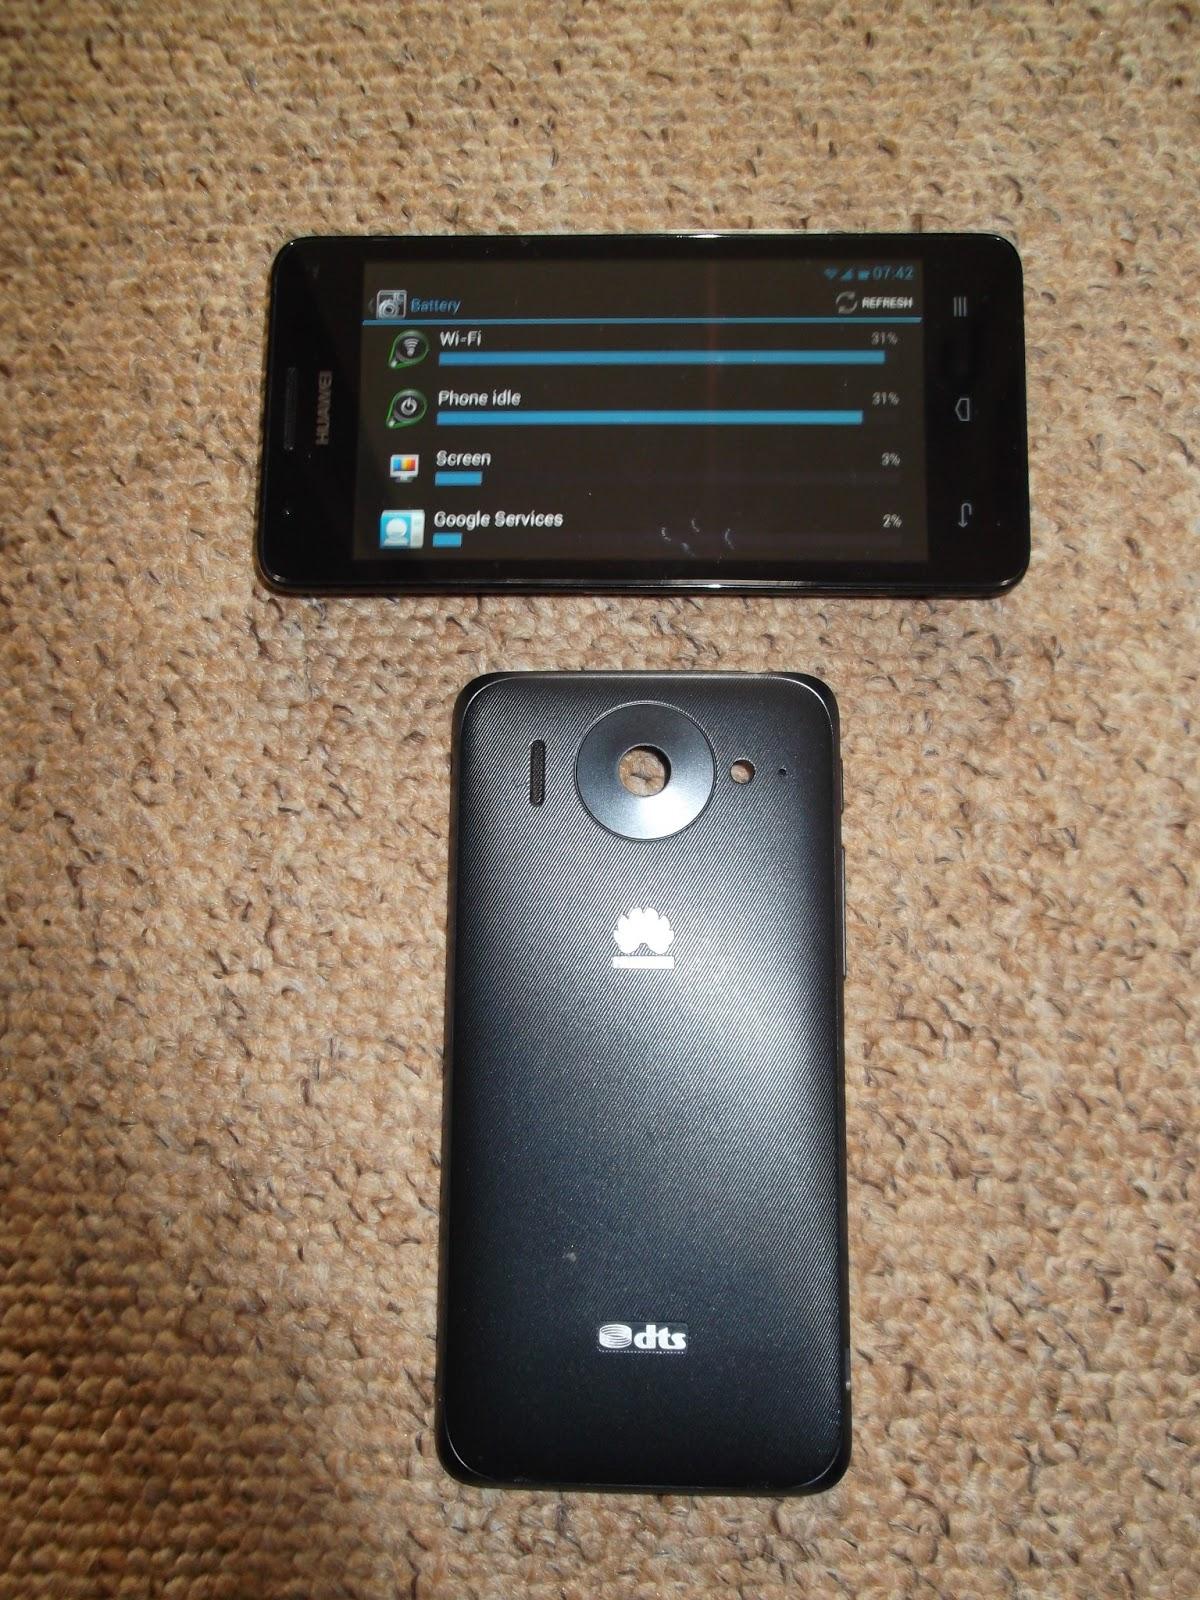 Android Phone Review - Huawei Ascend G510